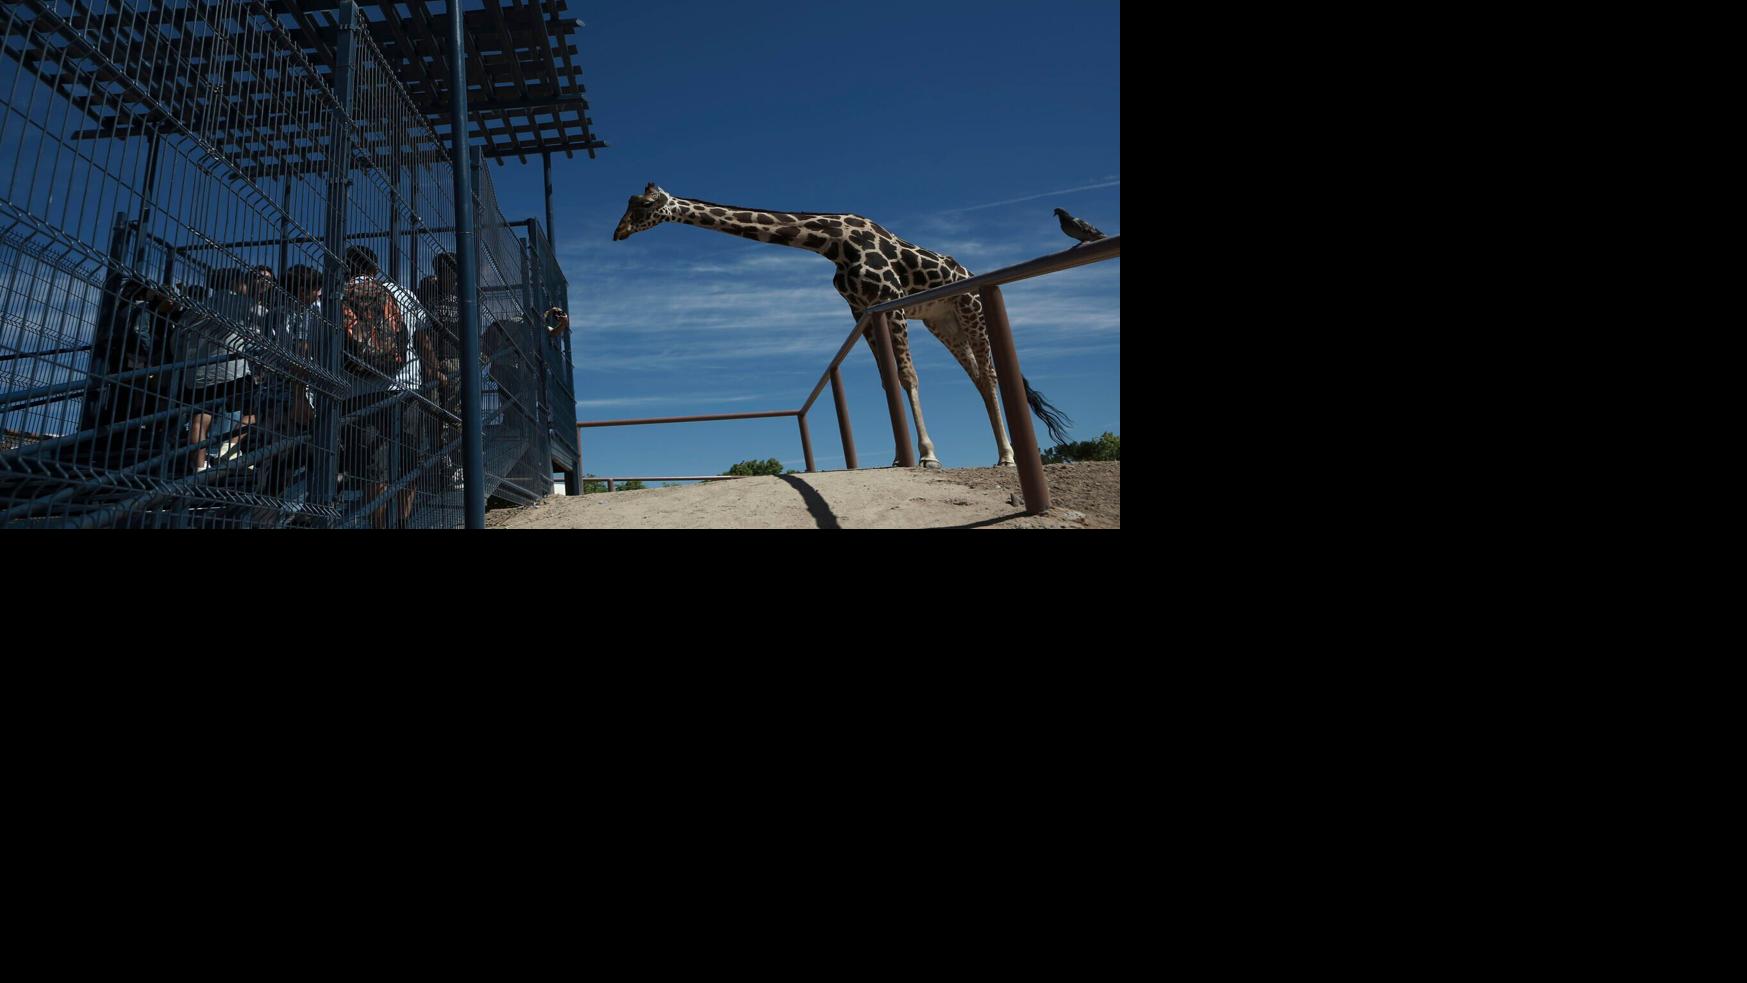 Benito the giraffe is alone and struggling at a small Mexican zoo. Activists want to change that